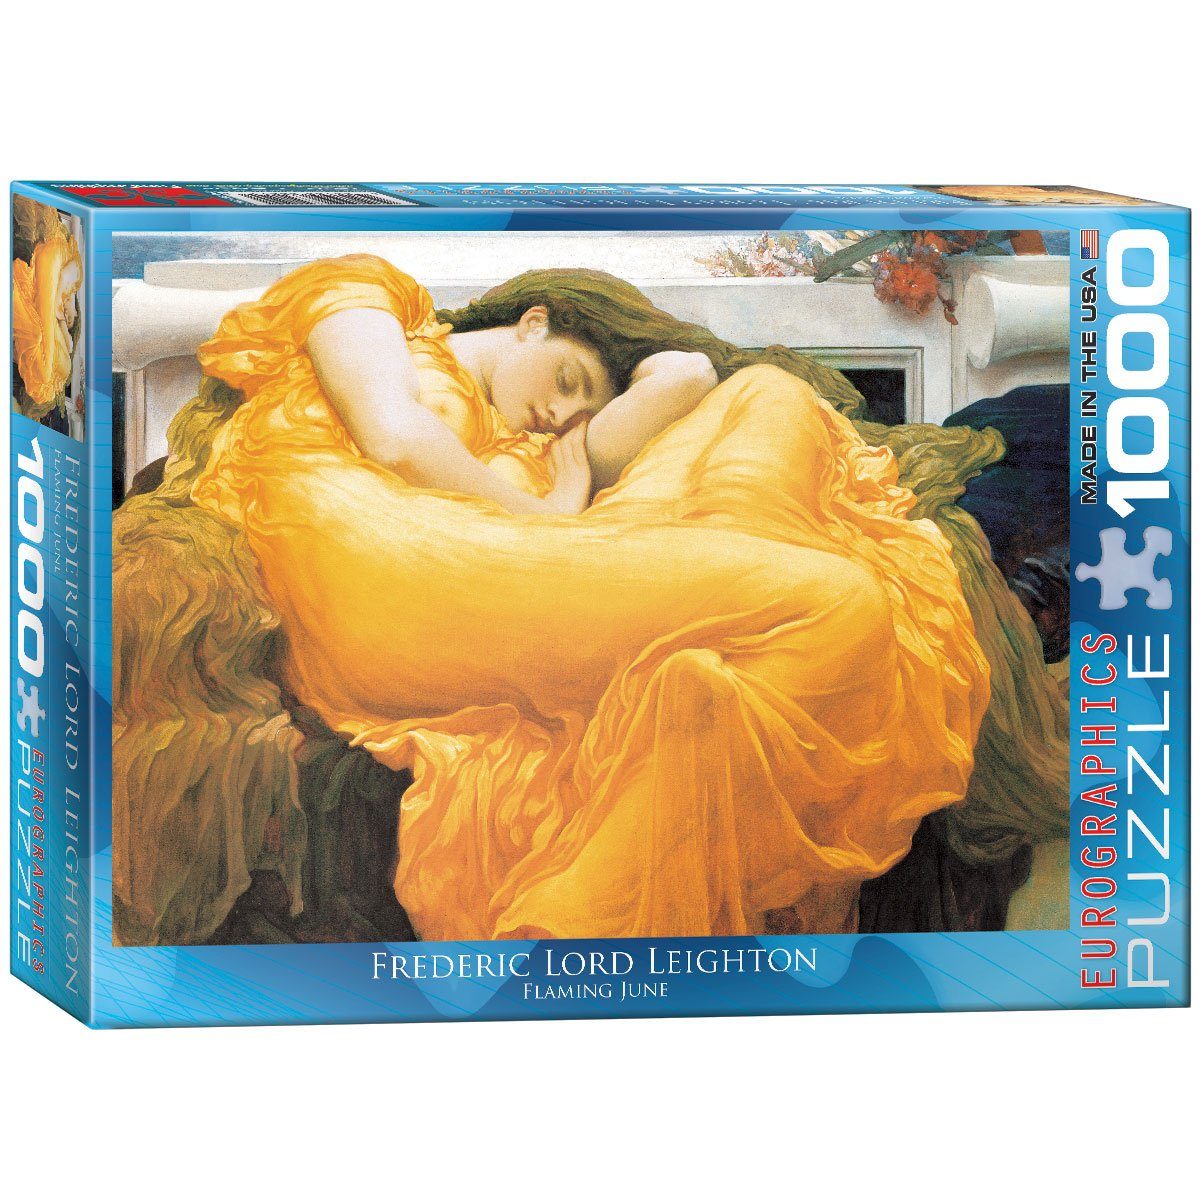 EUROGRAPHICS Puzzle EuroGraphics 6000-3214 Flaming June Lord Leighton, 1000 Puzzleteile